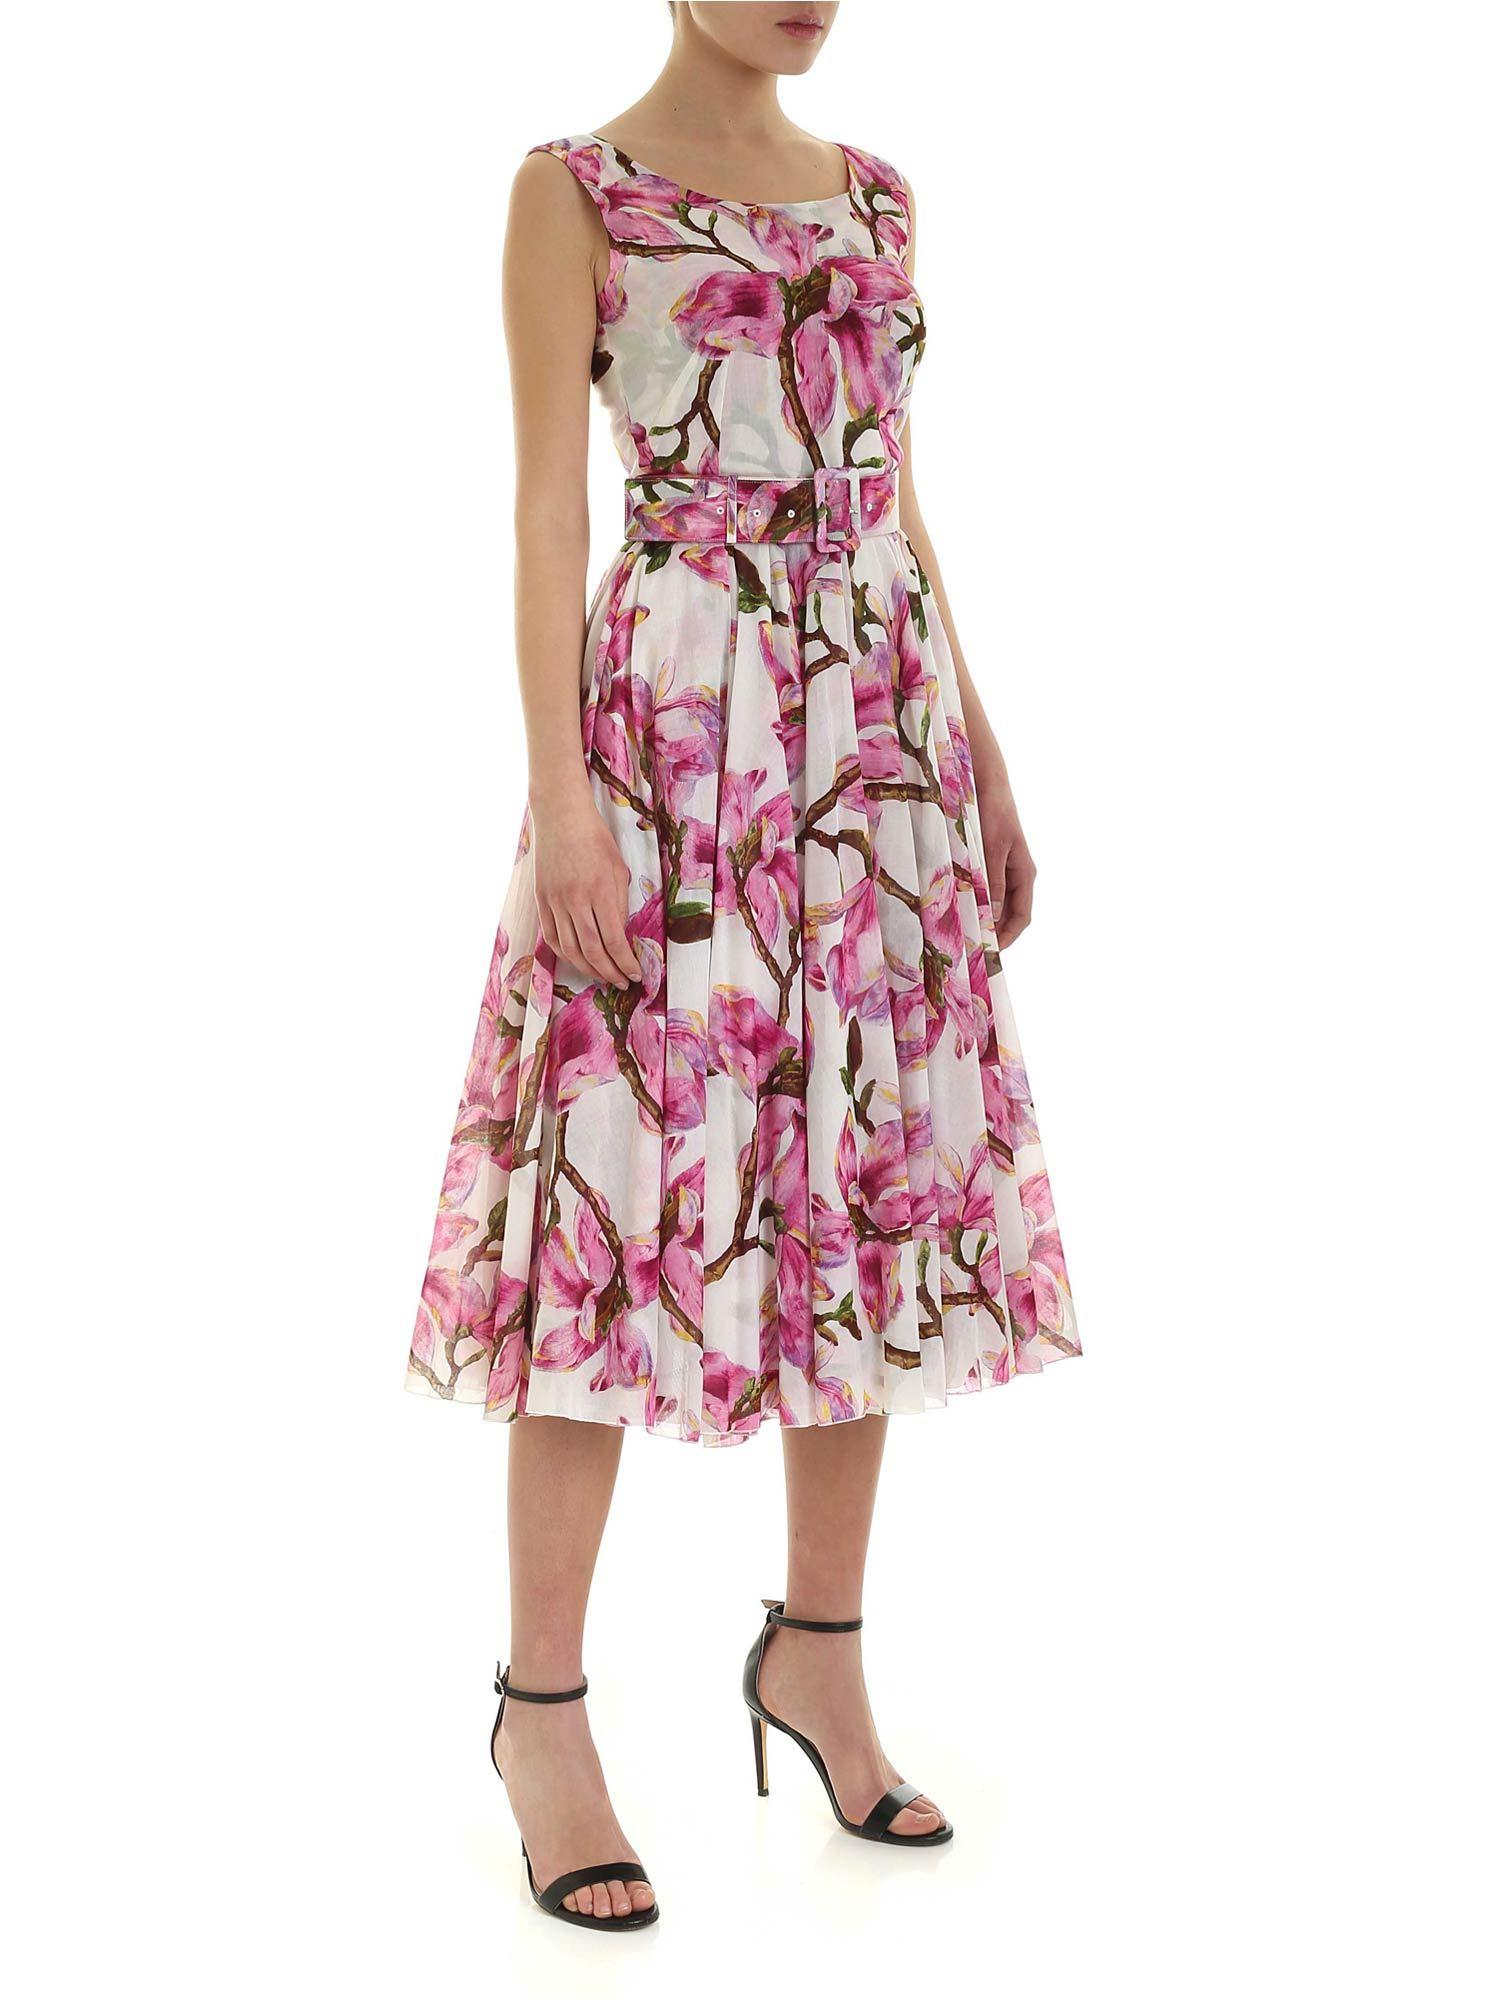 Samantha Sung Aster Magnolia Blossom Dress in White - Lyst